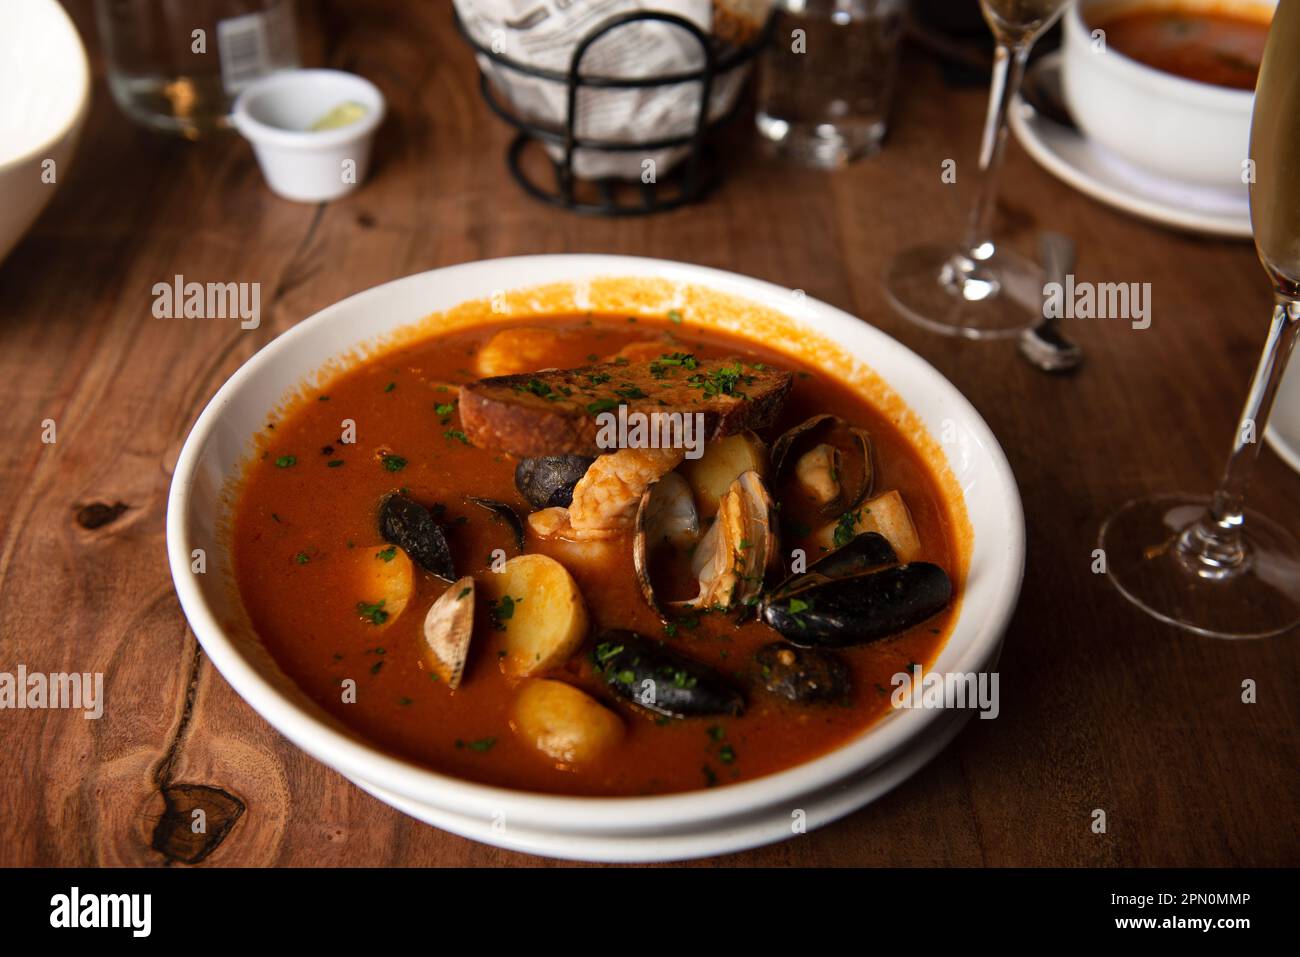 Steamed mussels in white plate with tomatoes, potatoes and bread, garnished with garlic in a restaurant setting Stock Photo